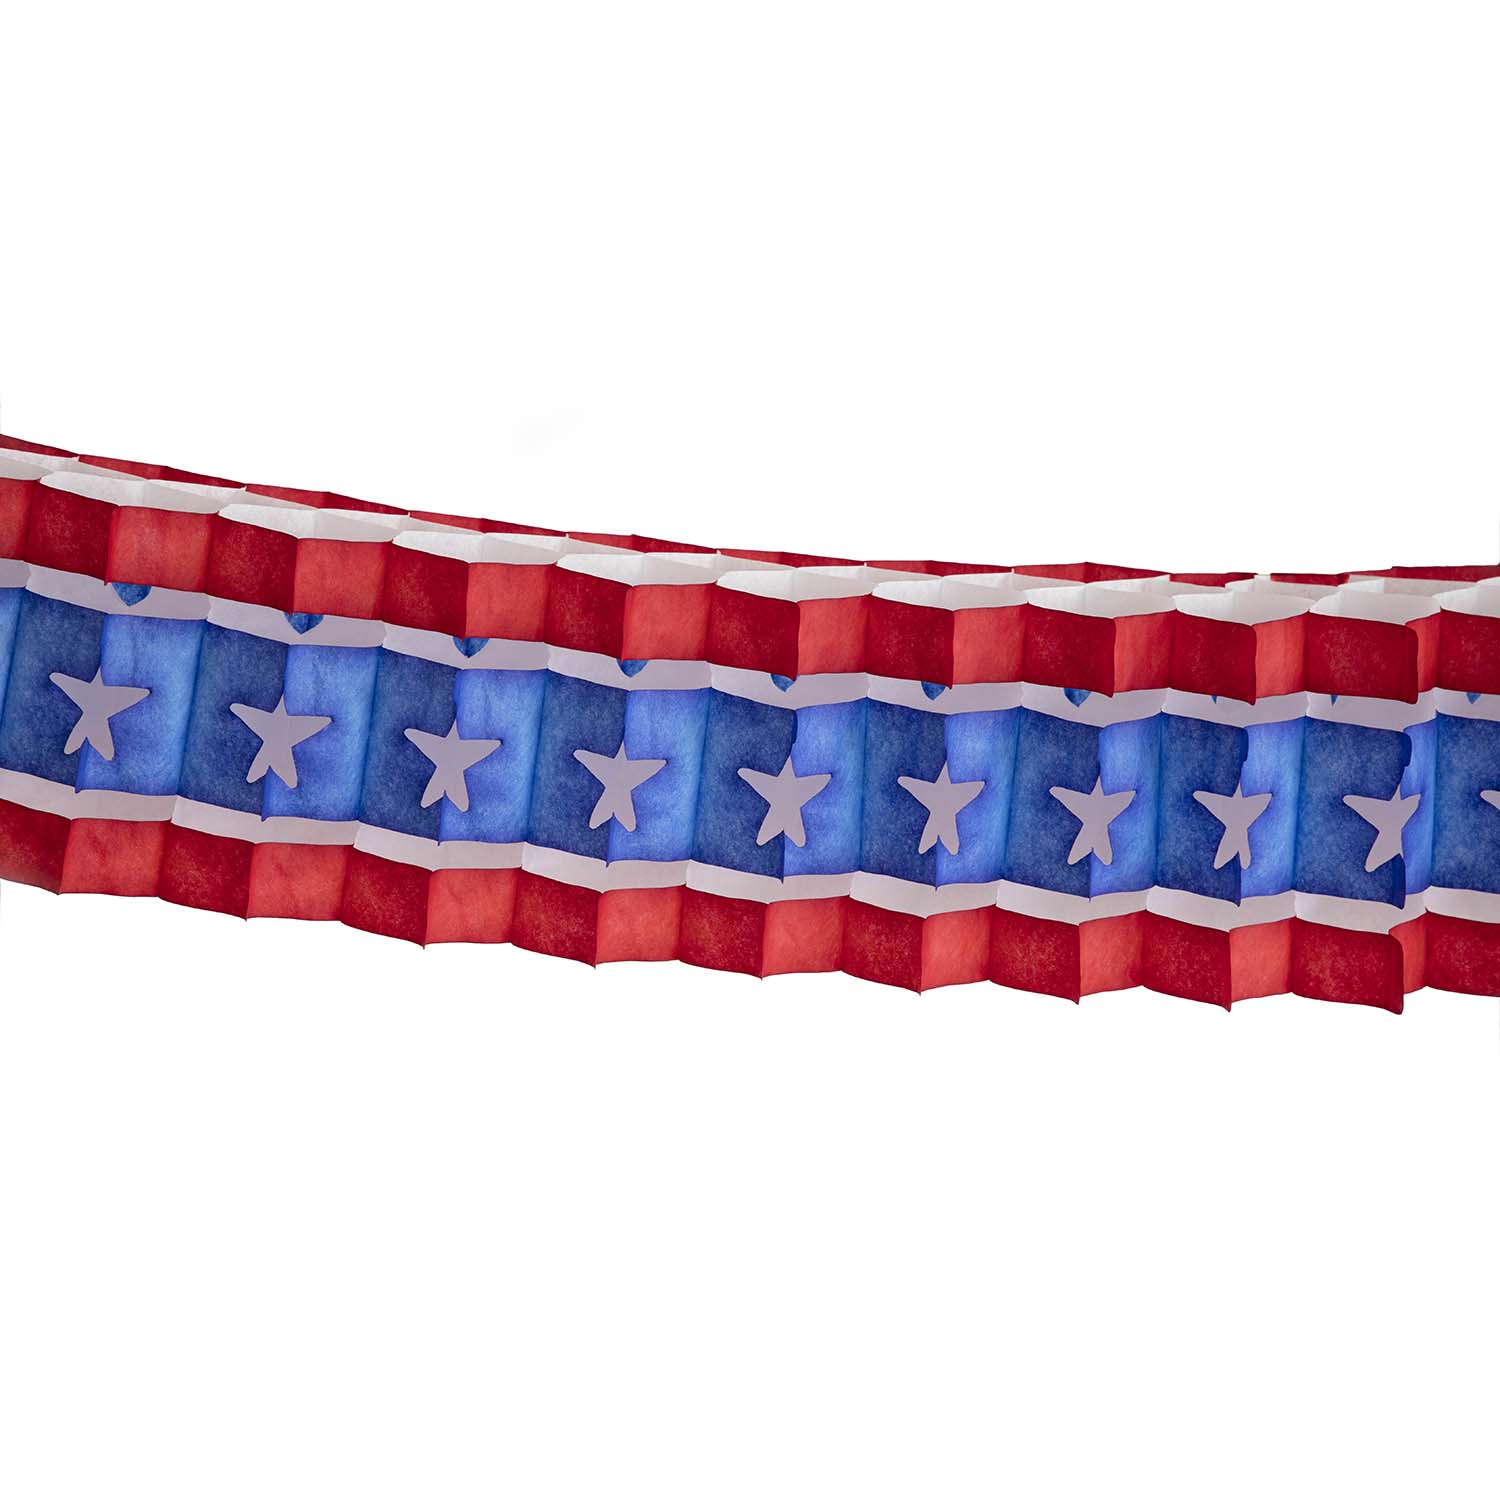 A Hester &amp; Cook Patriotic Star Garland with blue and red stripes on a white background.